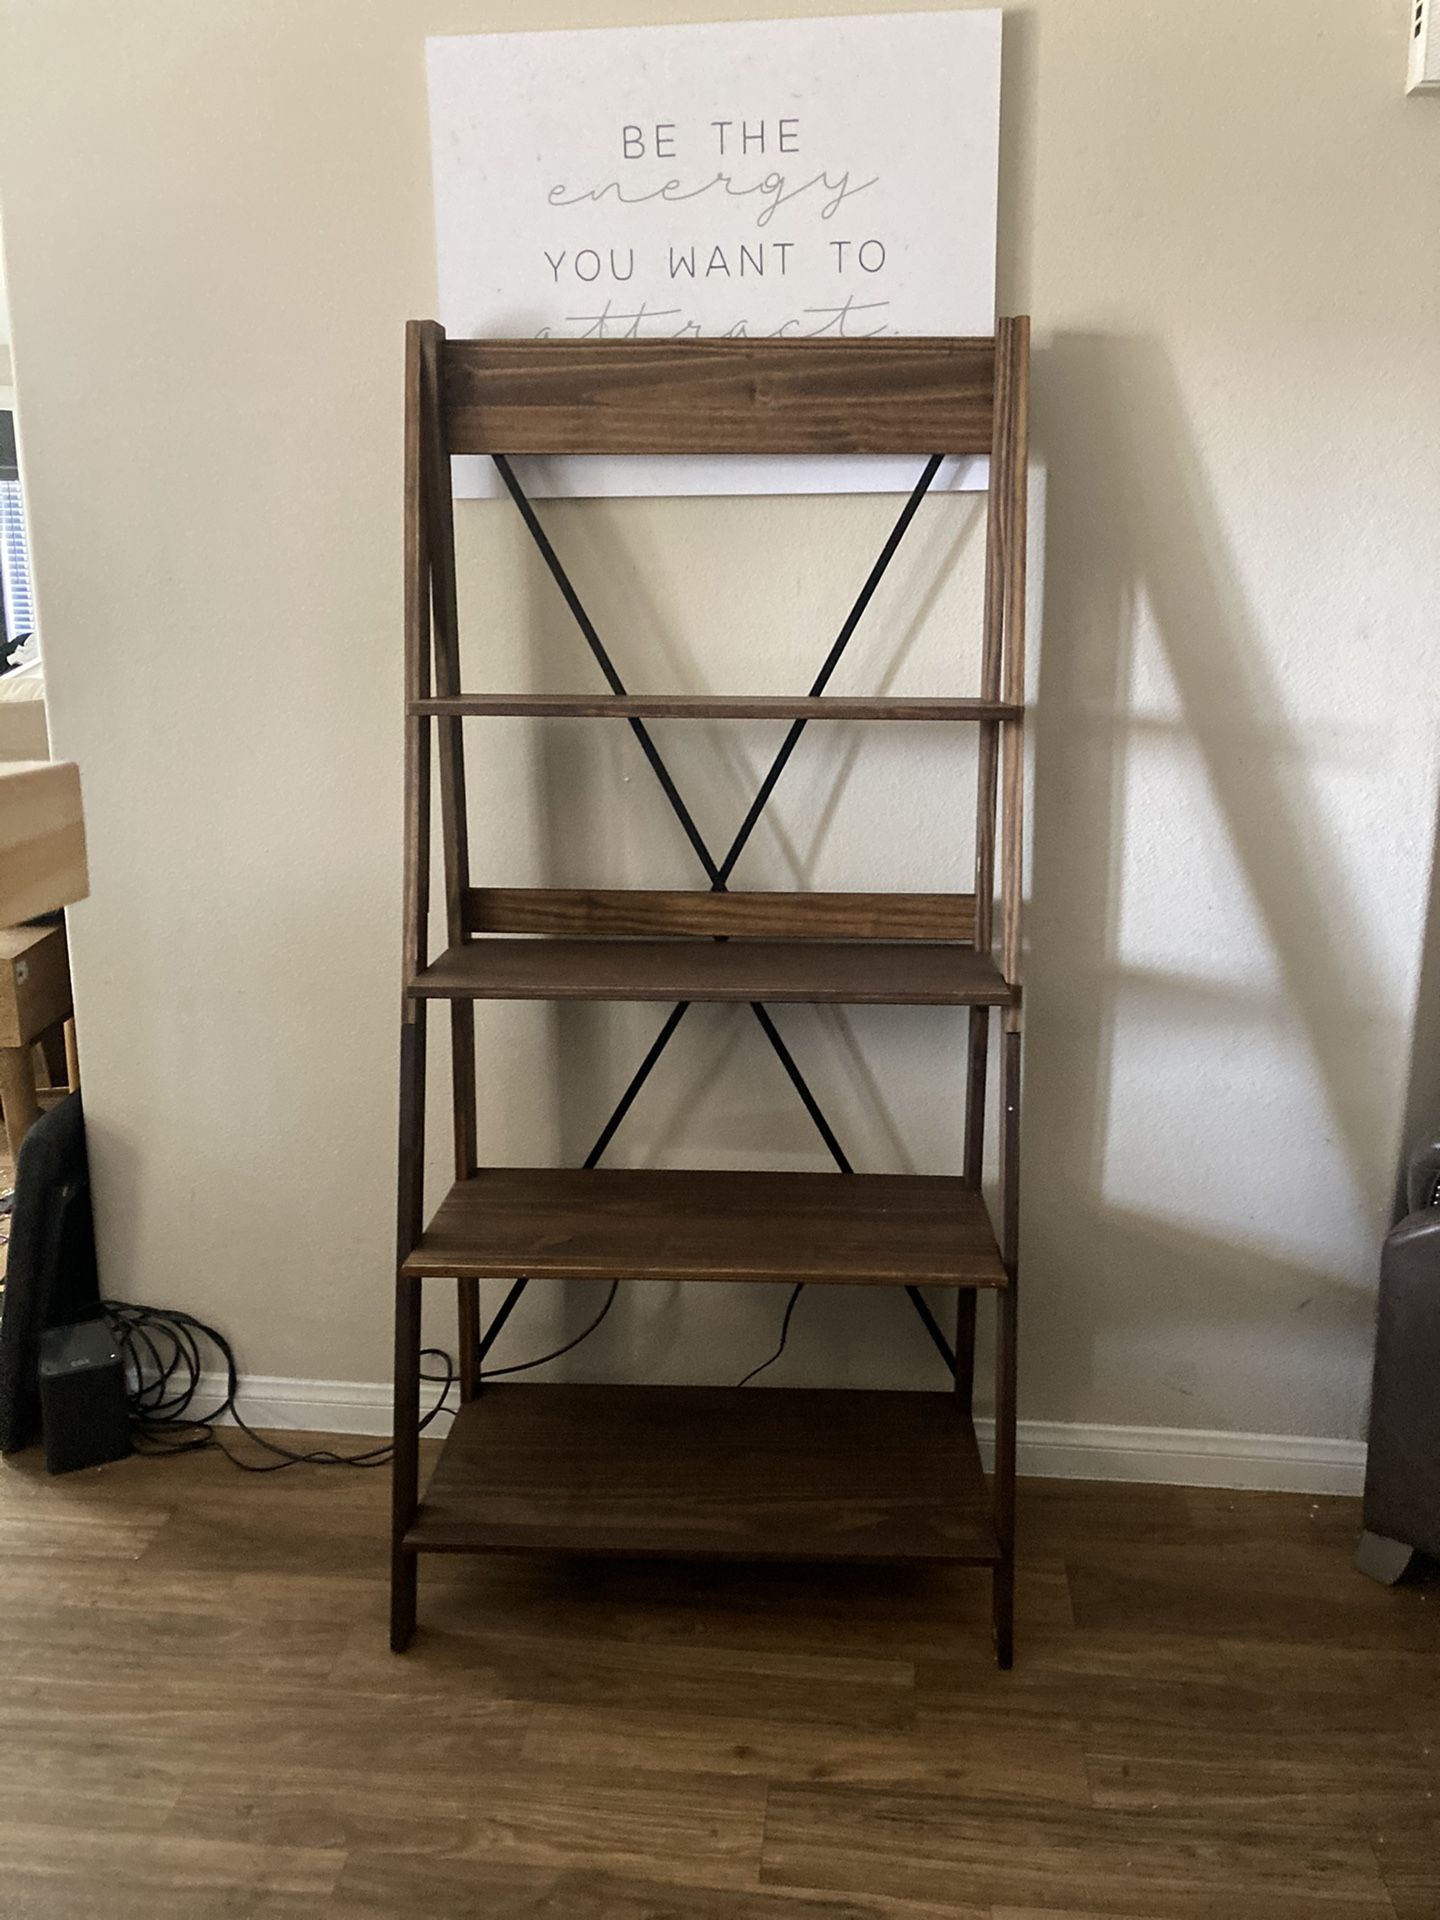 New 68" Solid Leaning Ladder Bookshelf  Walker Edison- Brown  Awesome 🏷 Deal   🚚 Delivery Avail   ➡️ Details Below ⬇️  